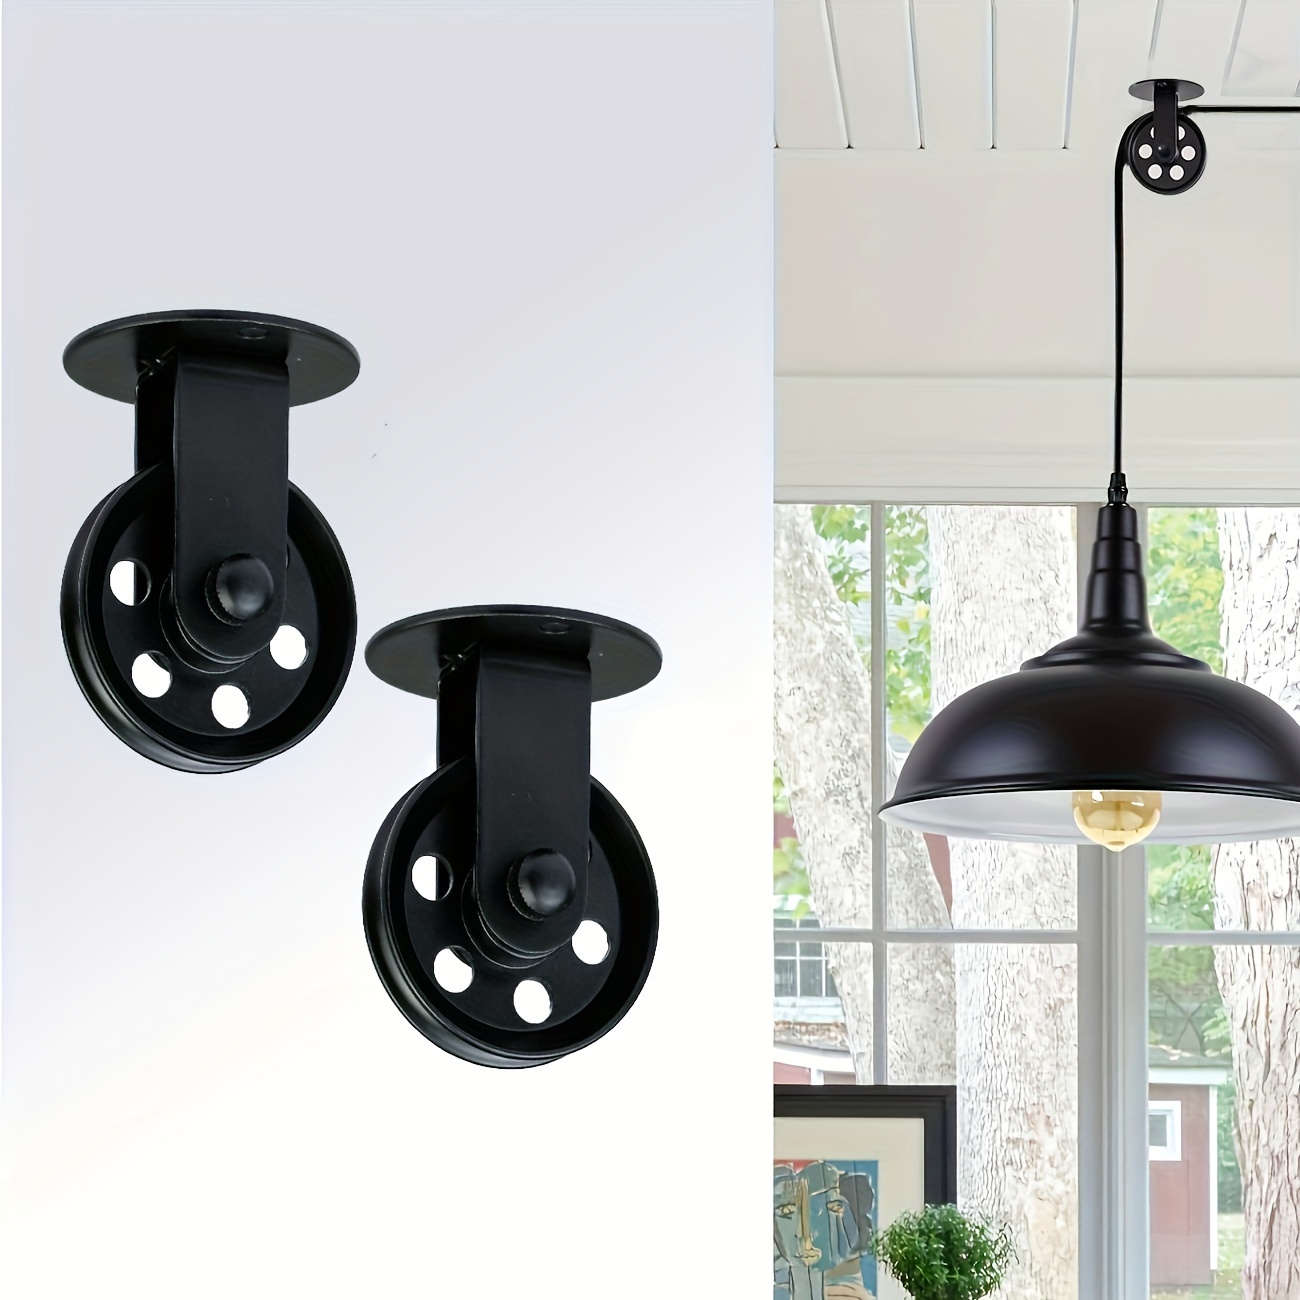 

2pcs 2.75" Black Pulley Wheels Set Of 2 For Plug In Pendant Light, Vintage Wall Ceiling Mount Pulleys For Hanging Lamp, Rustic Industrial Gazebo Pulleys For Chandelier Plant Grow Lights Outdoor